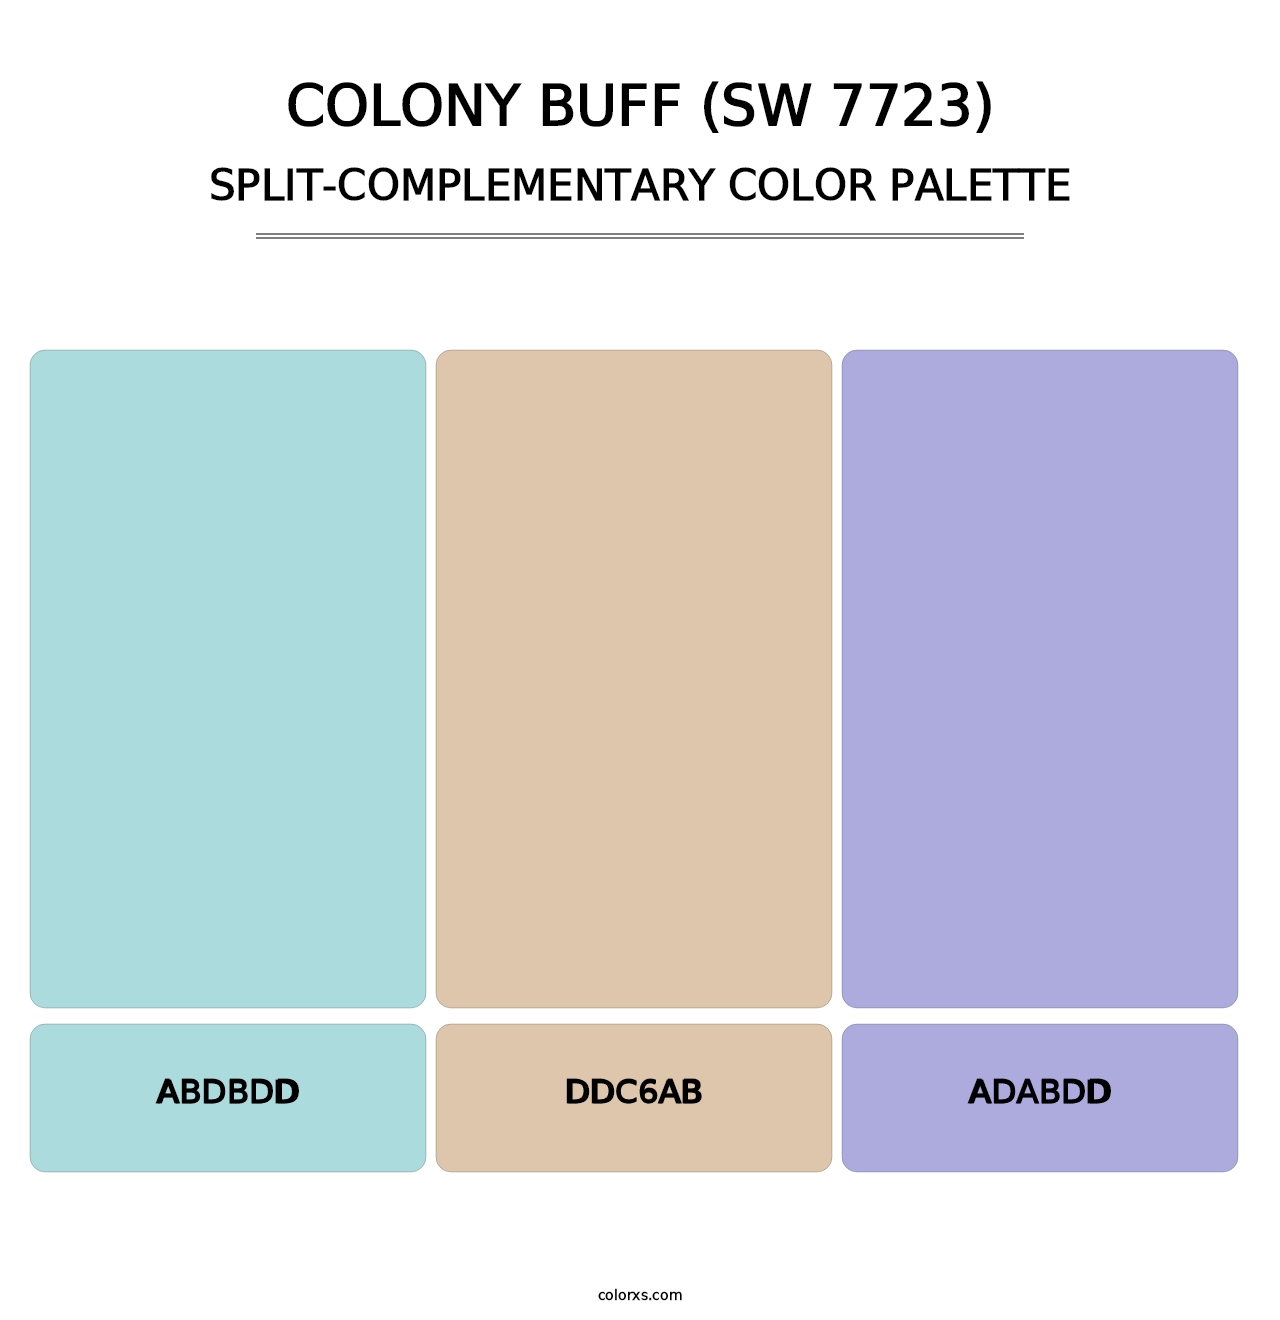 Colony Buff (SW 7723) - Split-Complementary Color Palette